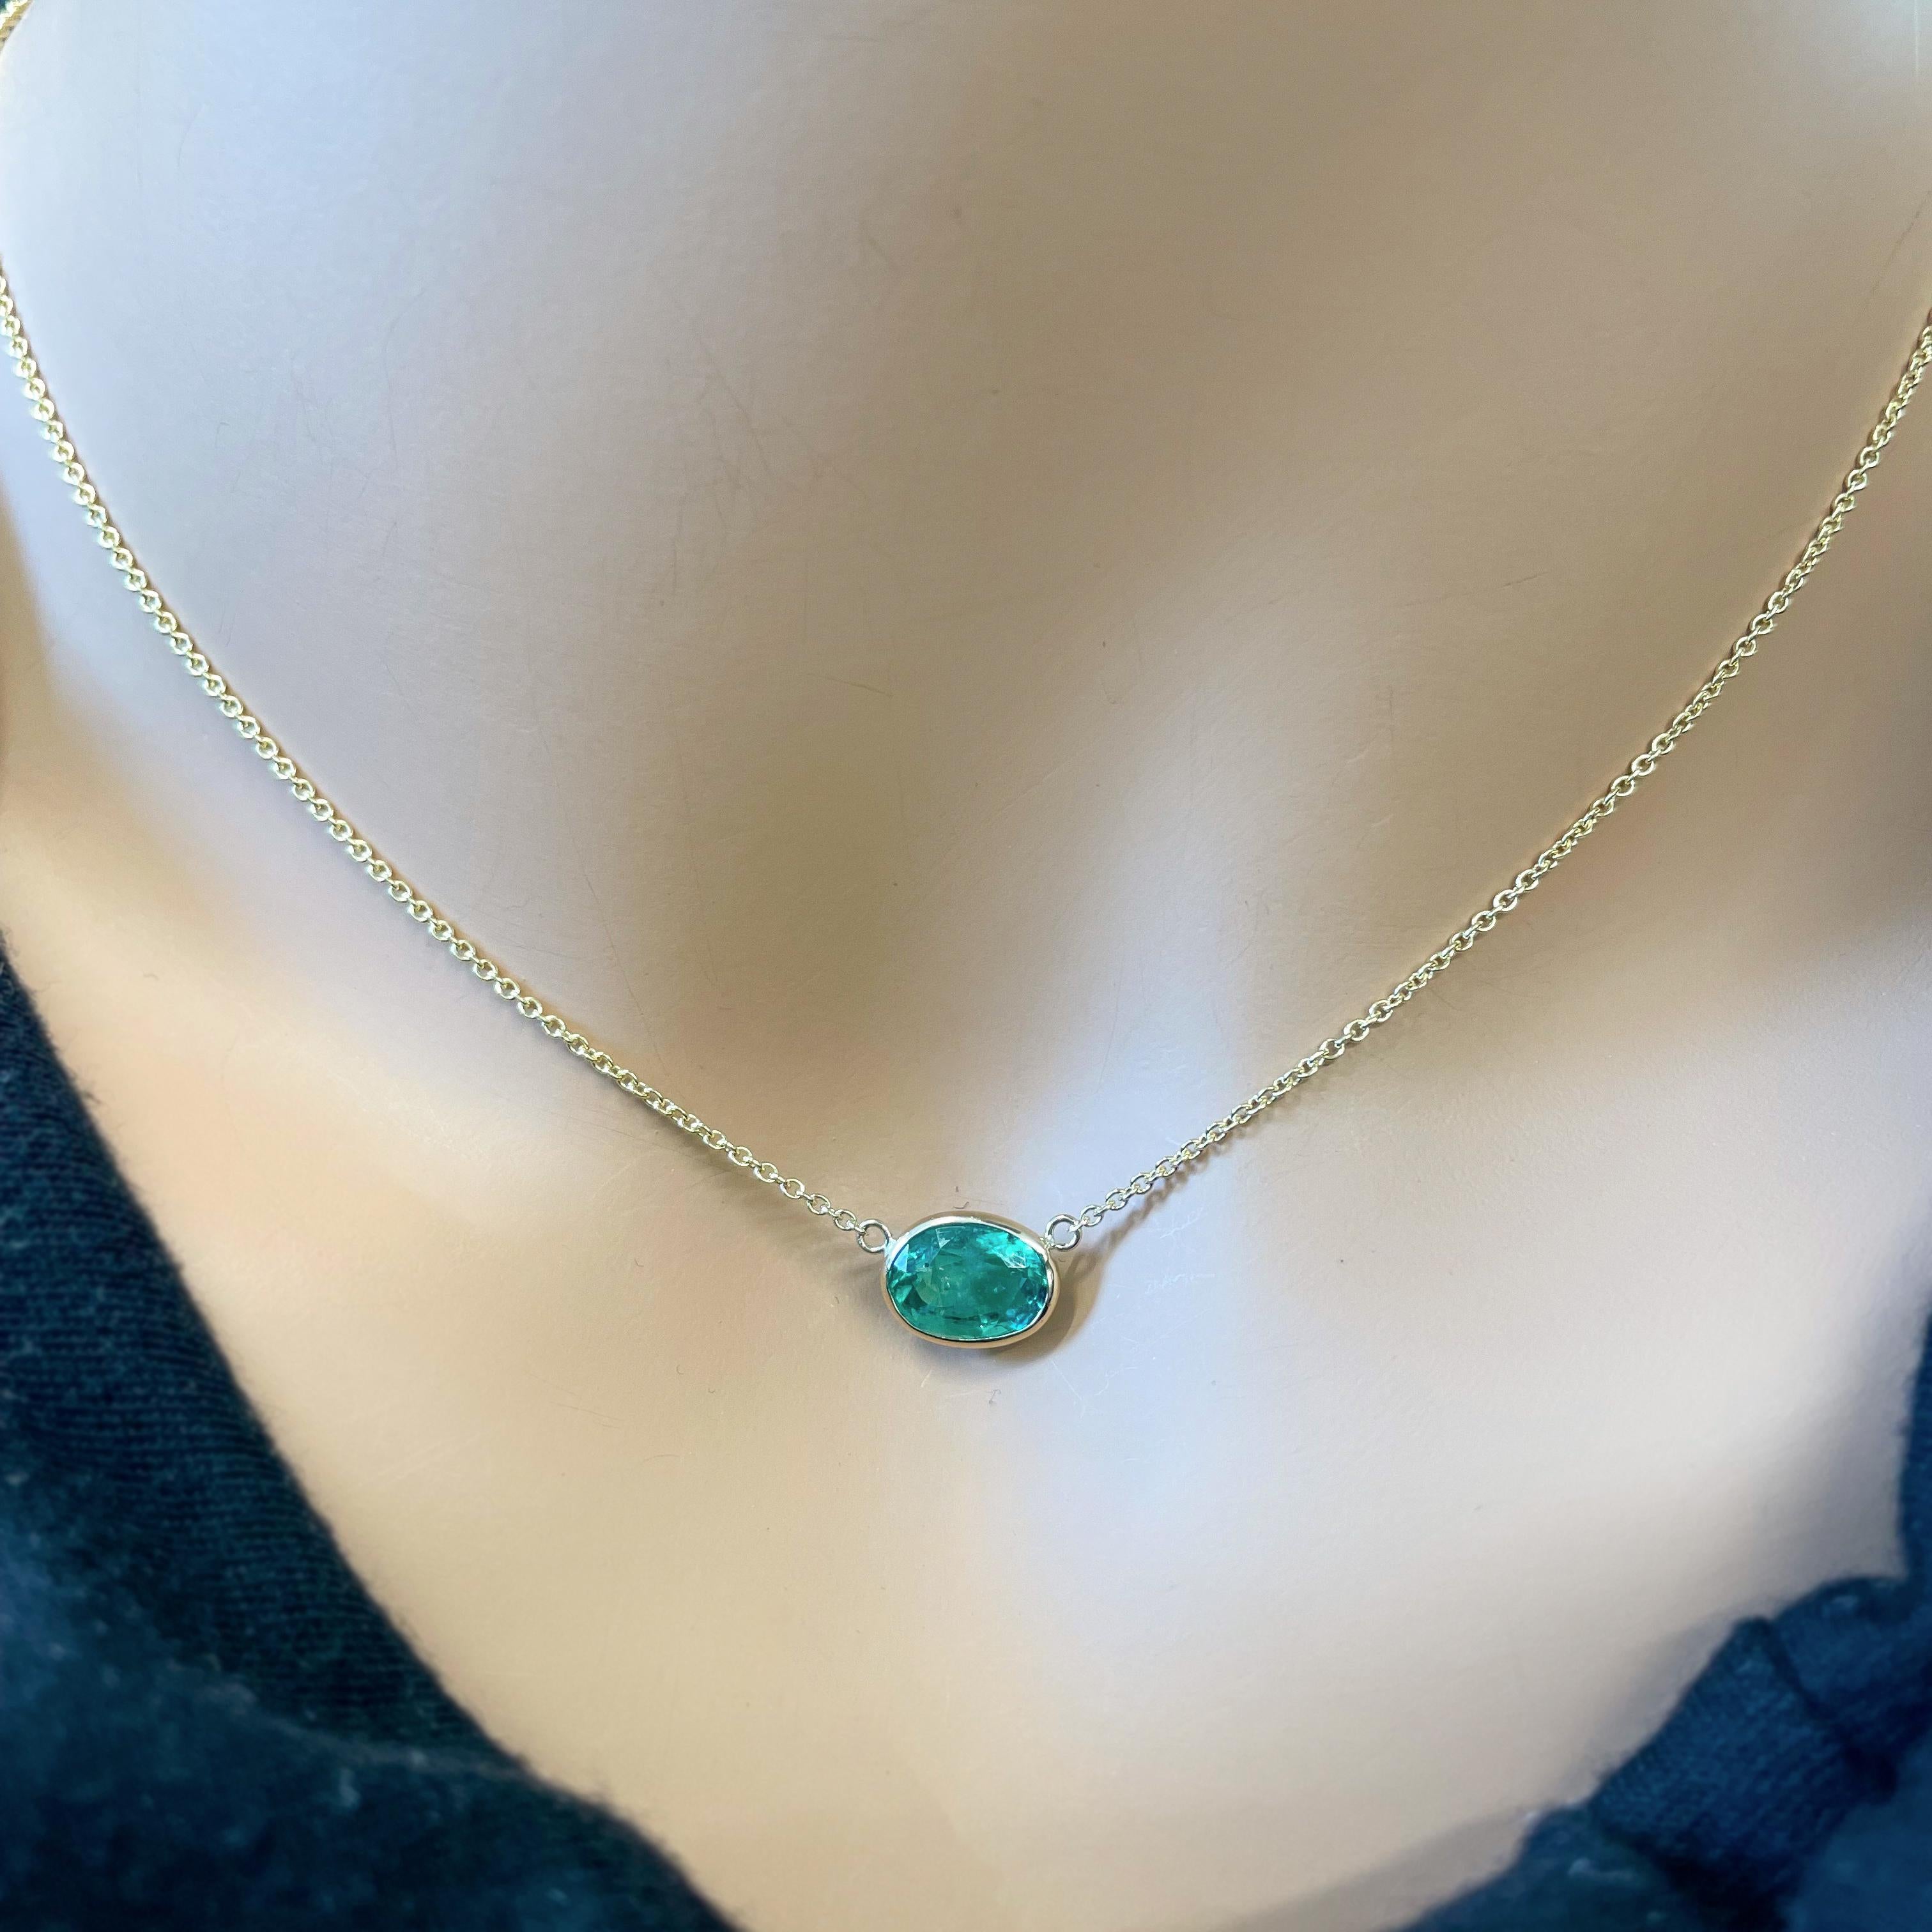 This necklace features an oval-cut green emerald with a weight of 1.73 carats, set in 14k yellow gold (YG). Emeralds are prized for their vibrant and rich green color, and the oval cut is a classic choice for gemstones, offering an elegant and